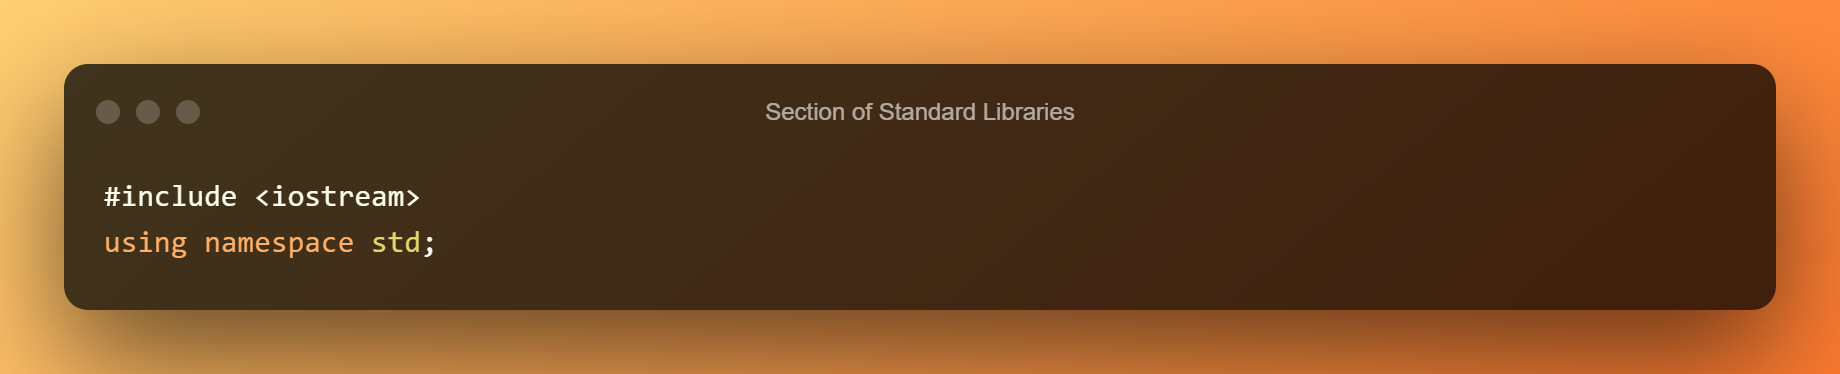 Section Of Standard Libraries